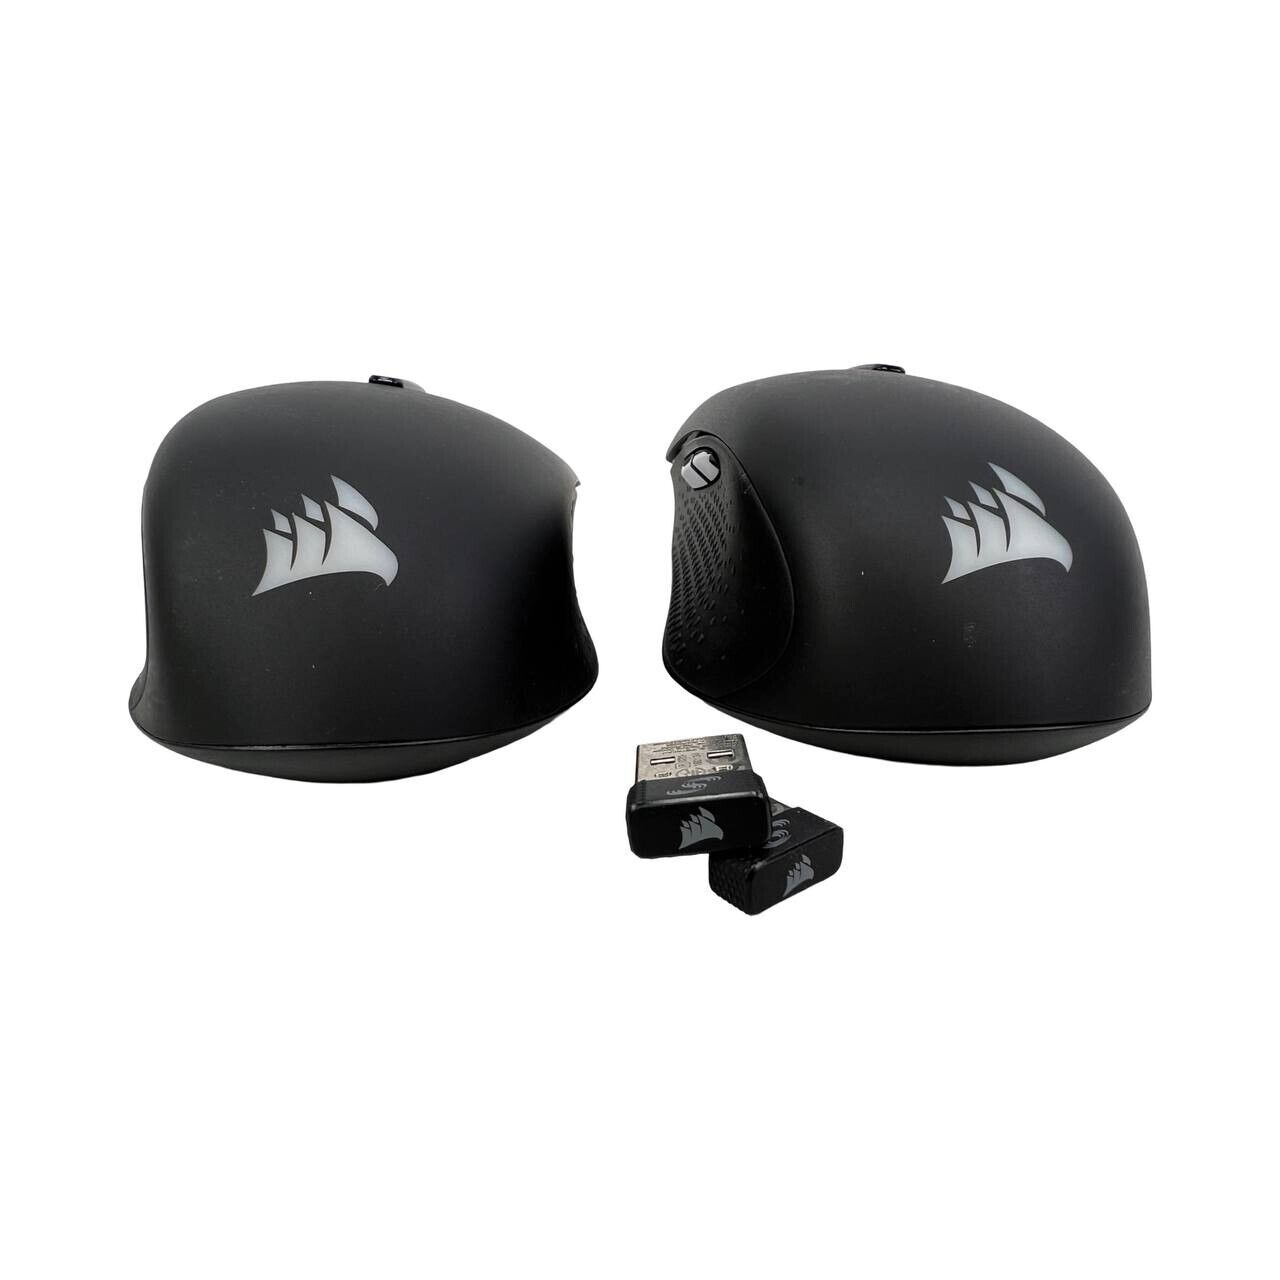 2x CORSAIR Harpoon RGB wireless / Bluetooth Mouse RGP0075 - No Cables 